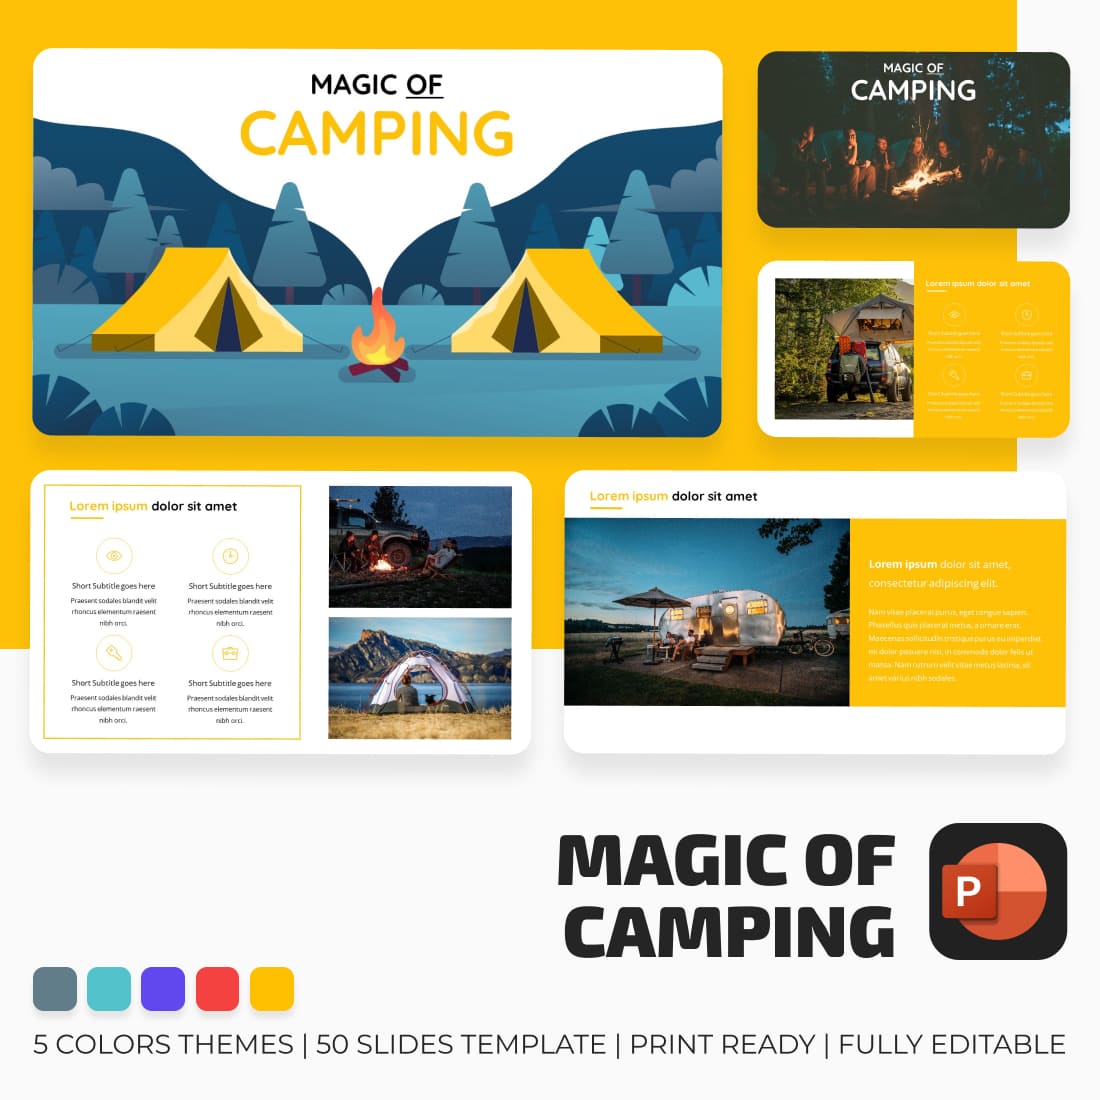 Camping PowerPoint Template main cover.